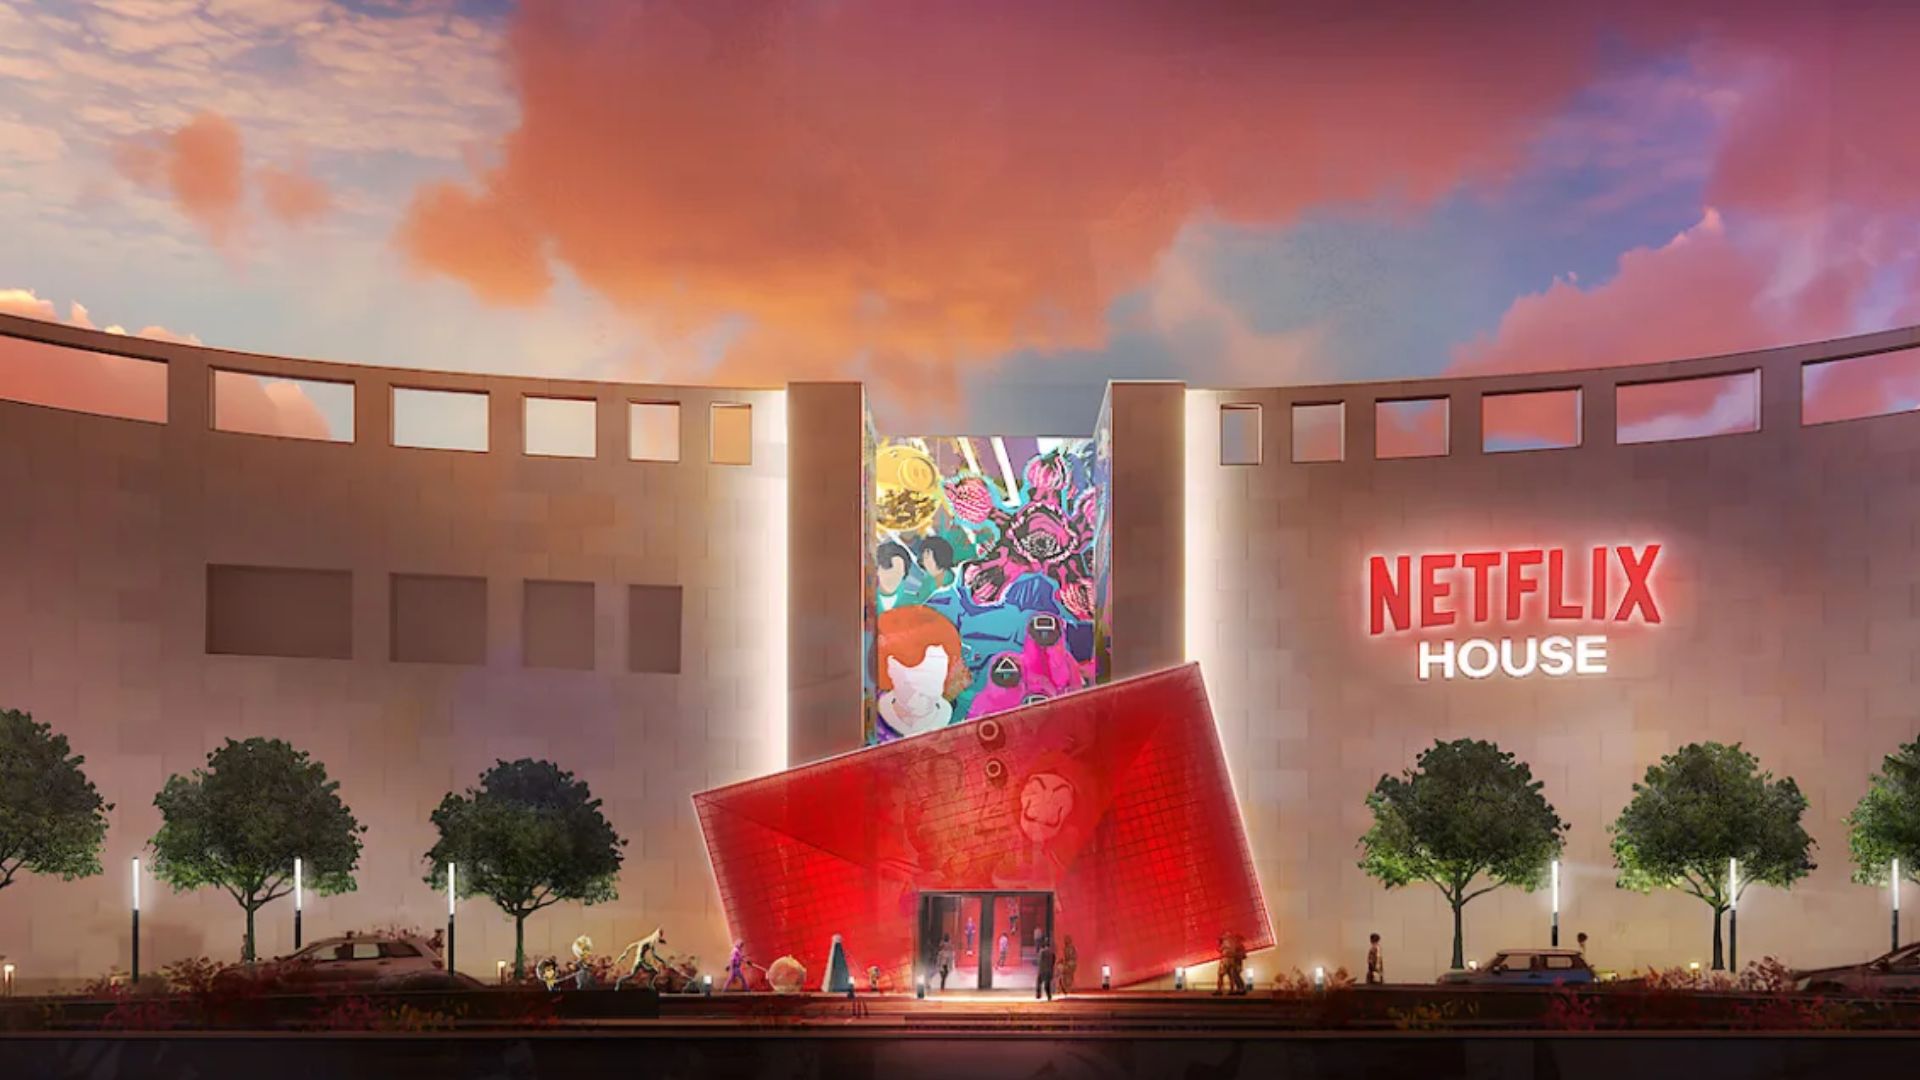 Netflix to open 2 massive venues with experiences, shops themed to its shows